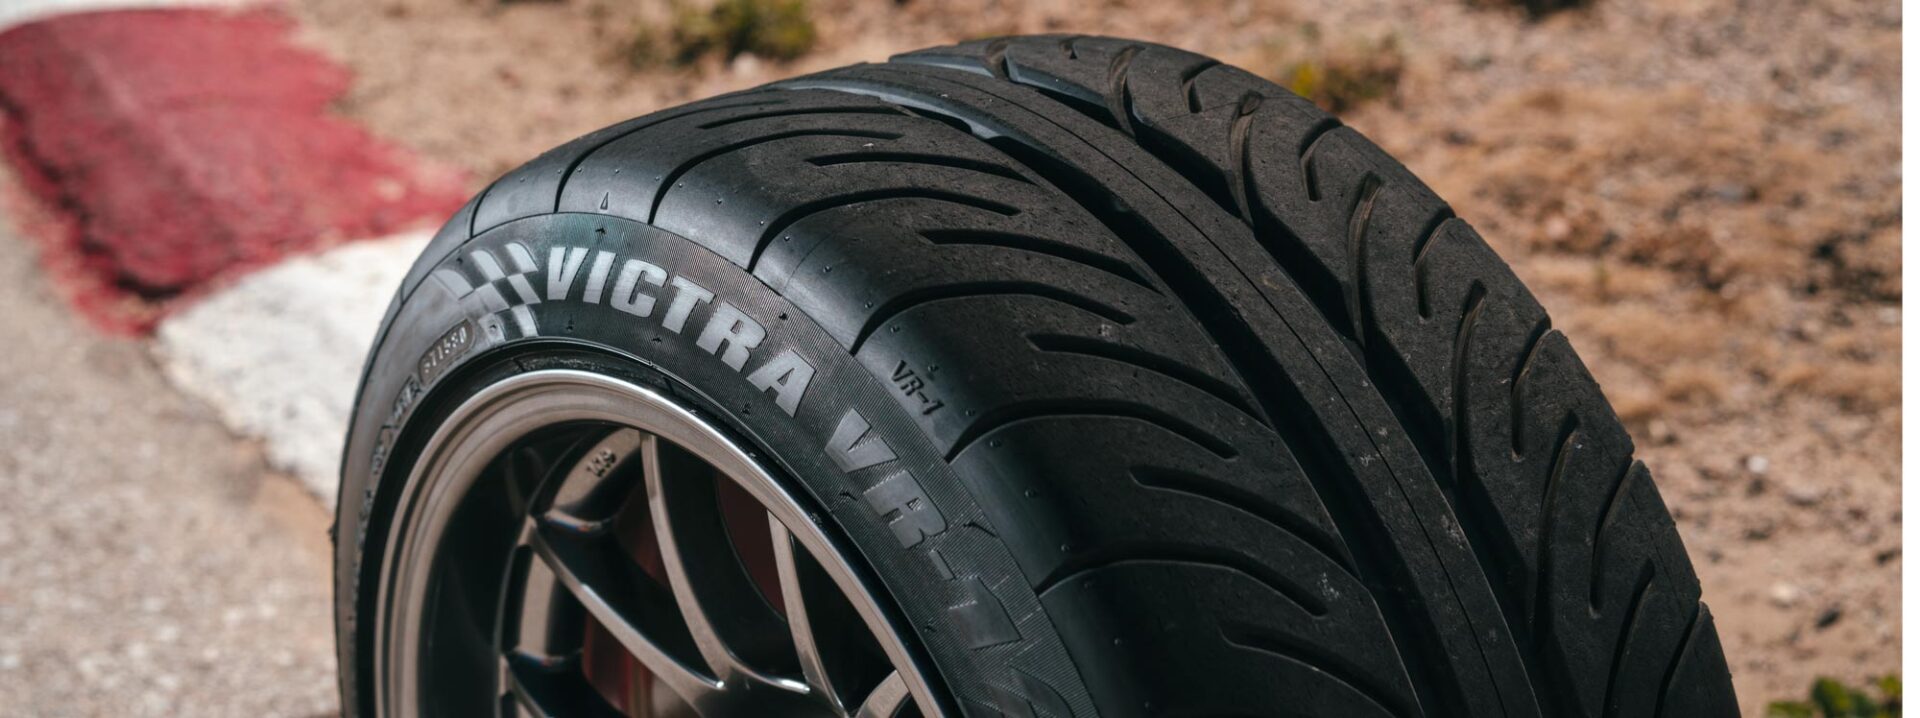 Maxxis Victra VR-1 tire tread and sidewall.